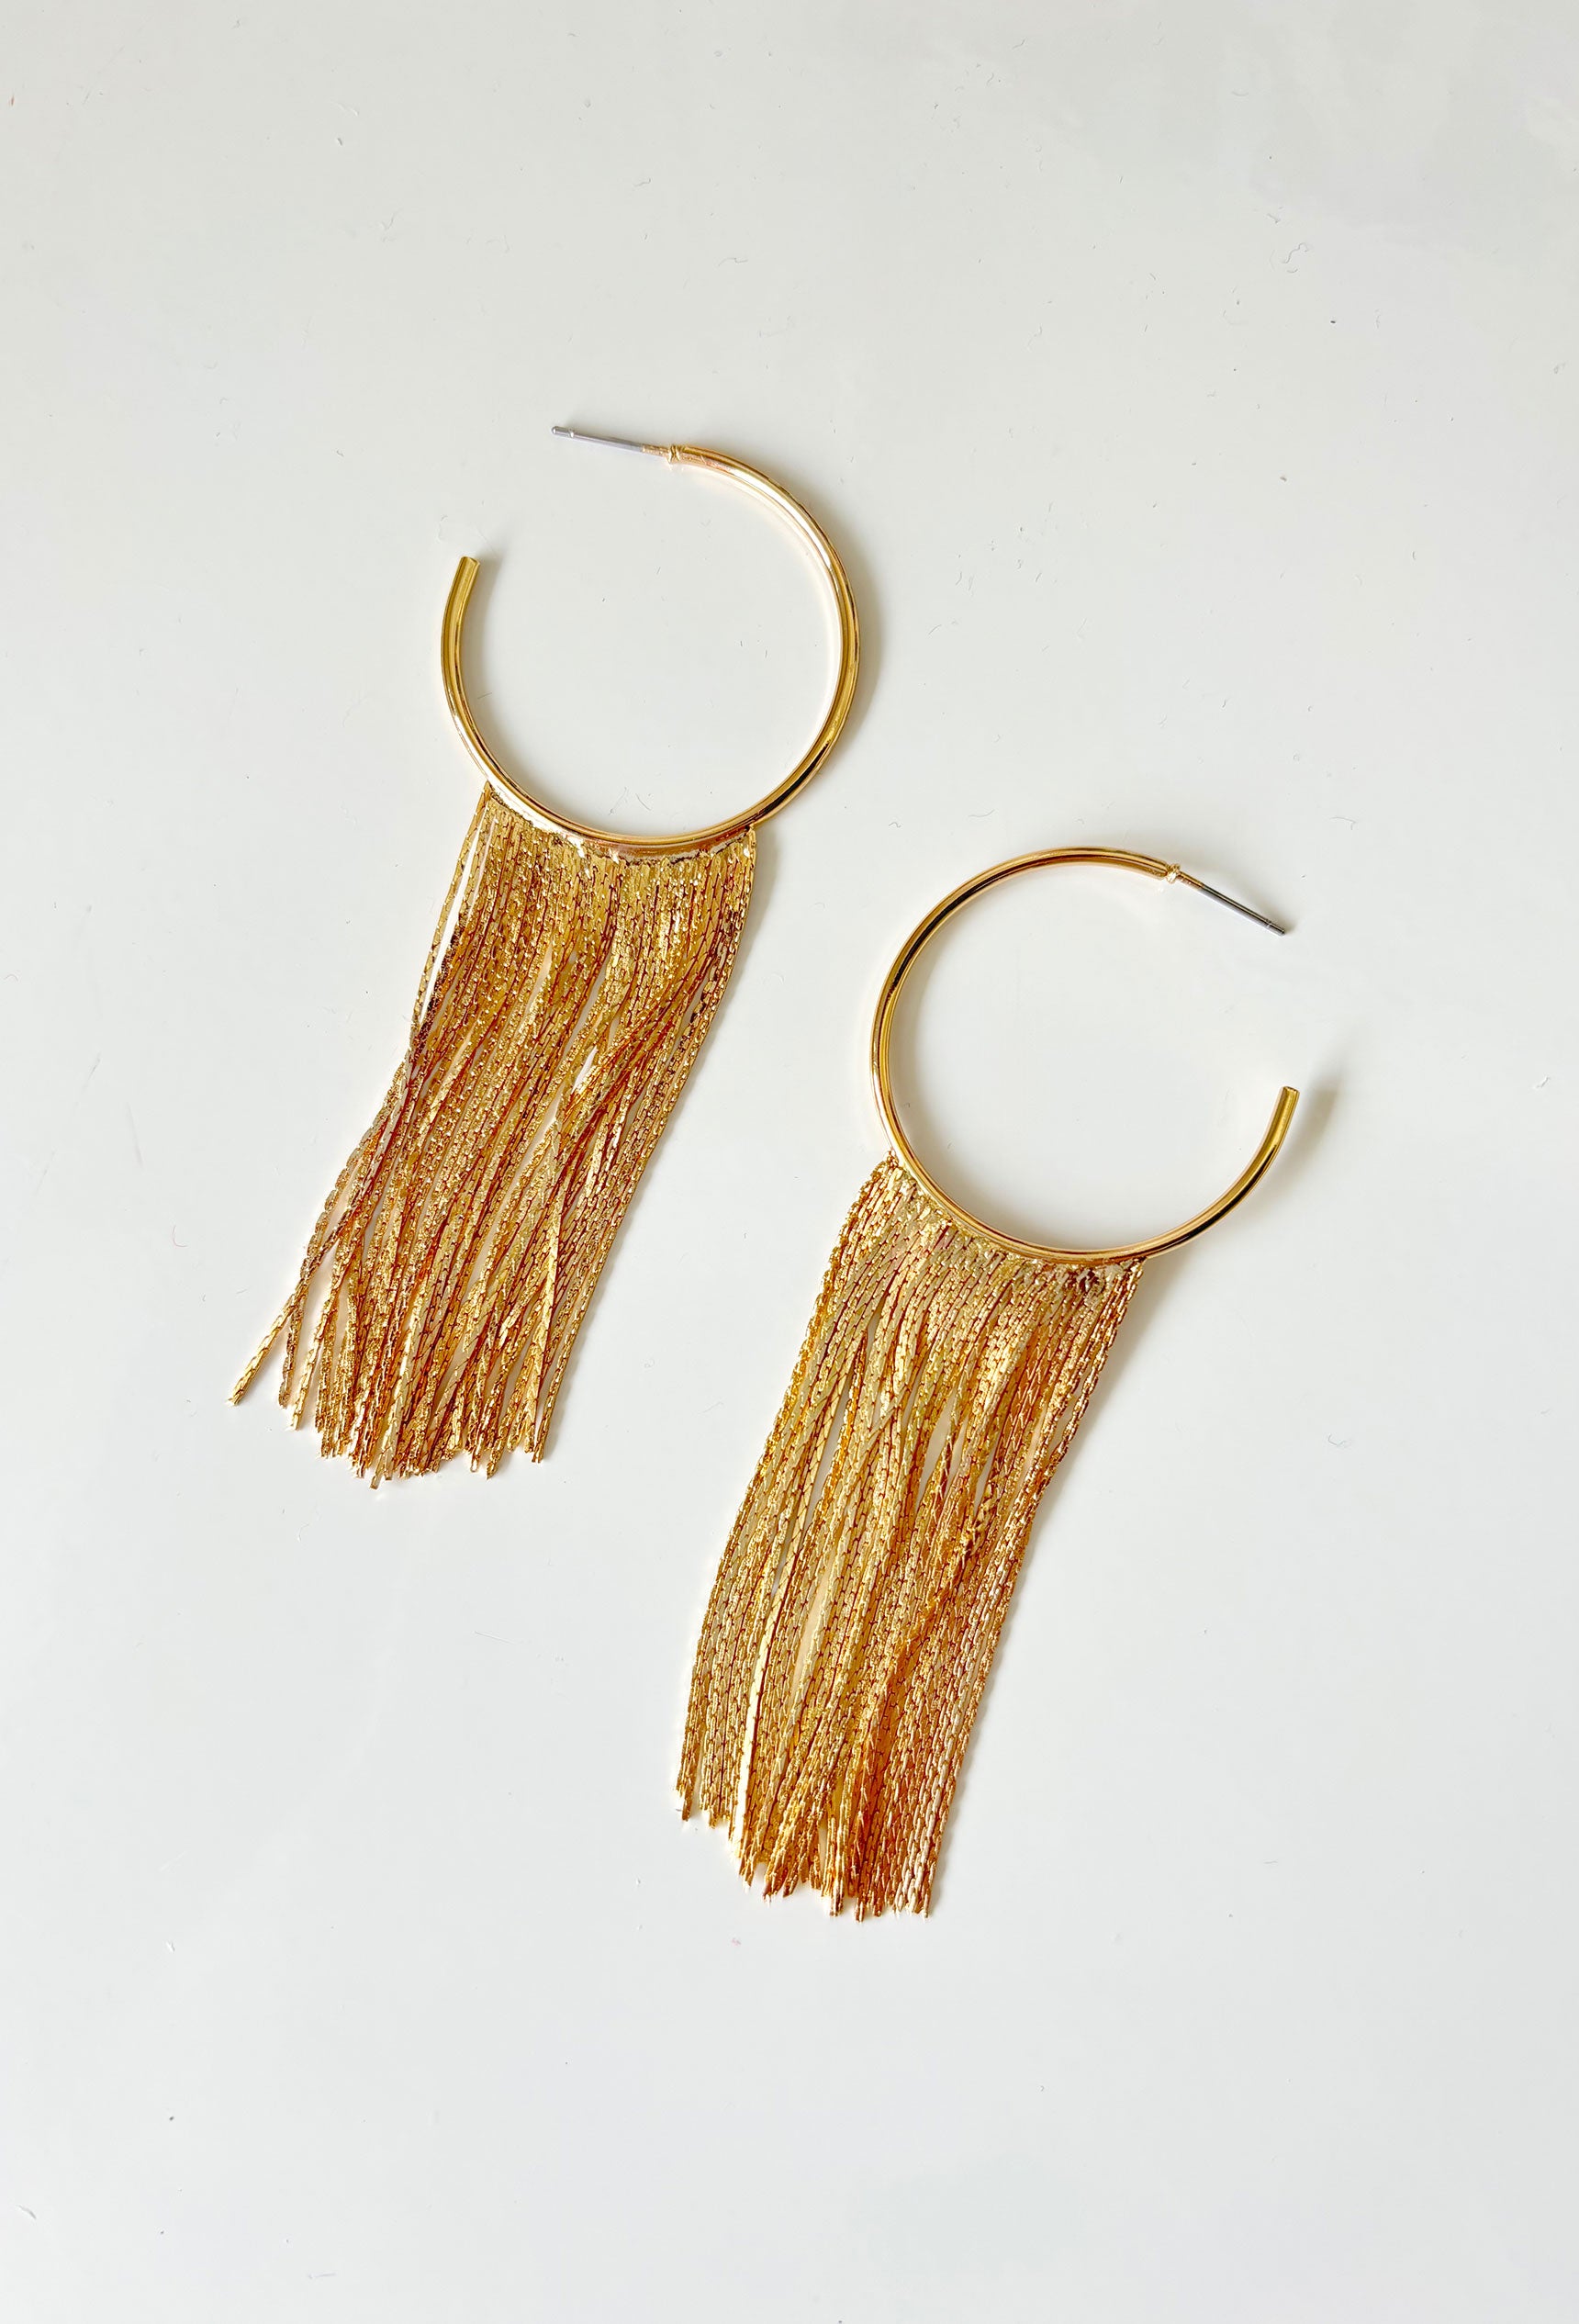 A Little Drama Earrings, gold hoop with gold fringe on the bottom of the hoop 